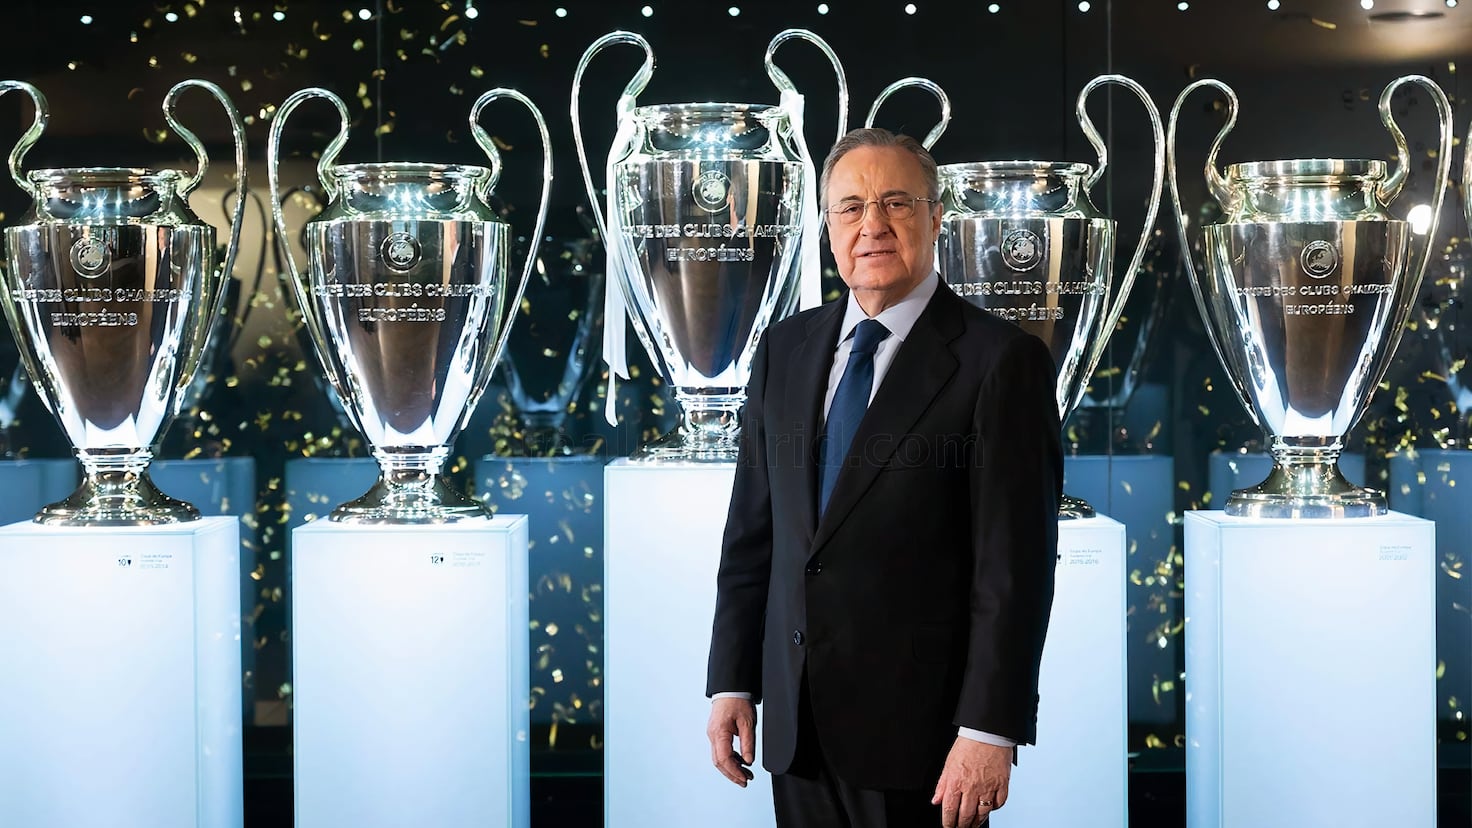 Real Madrid Clinches 36th La Liga Title, Florentino Pérez Becomes Most Decorated President in Club History